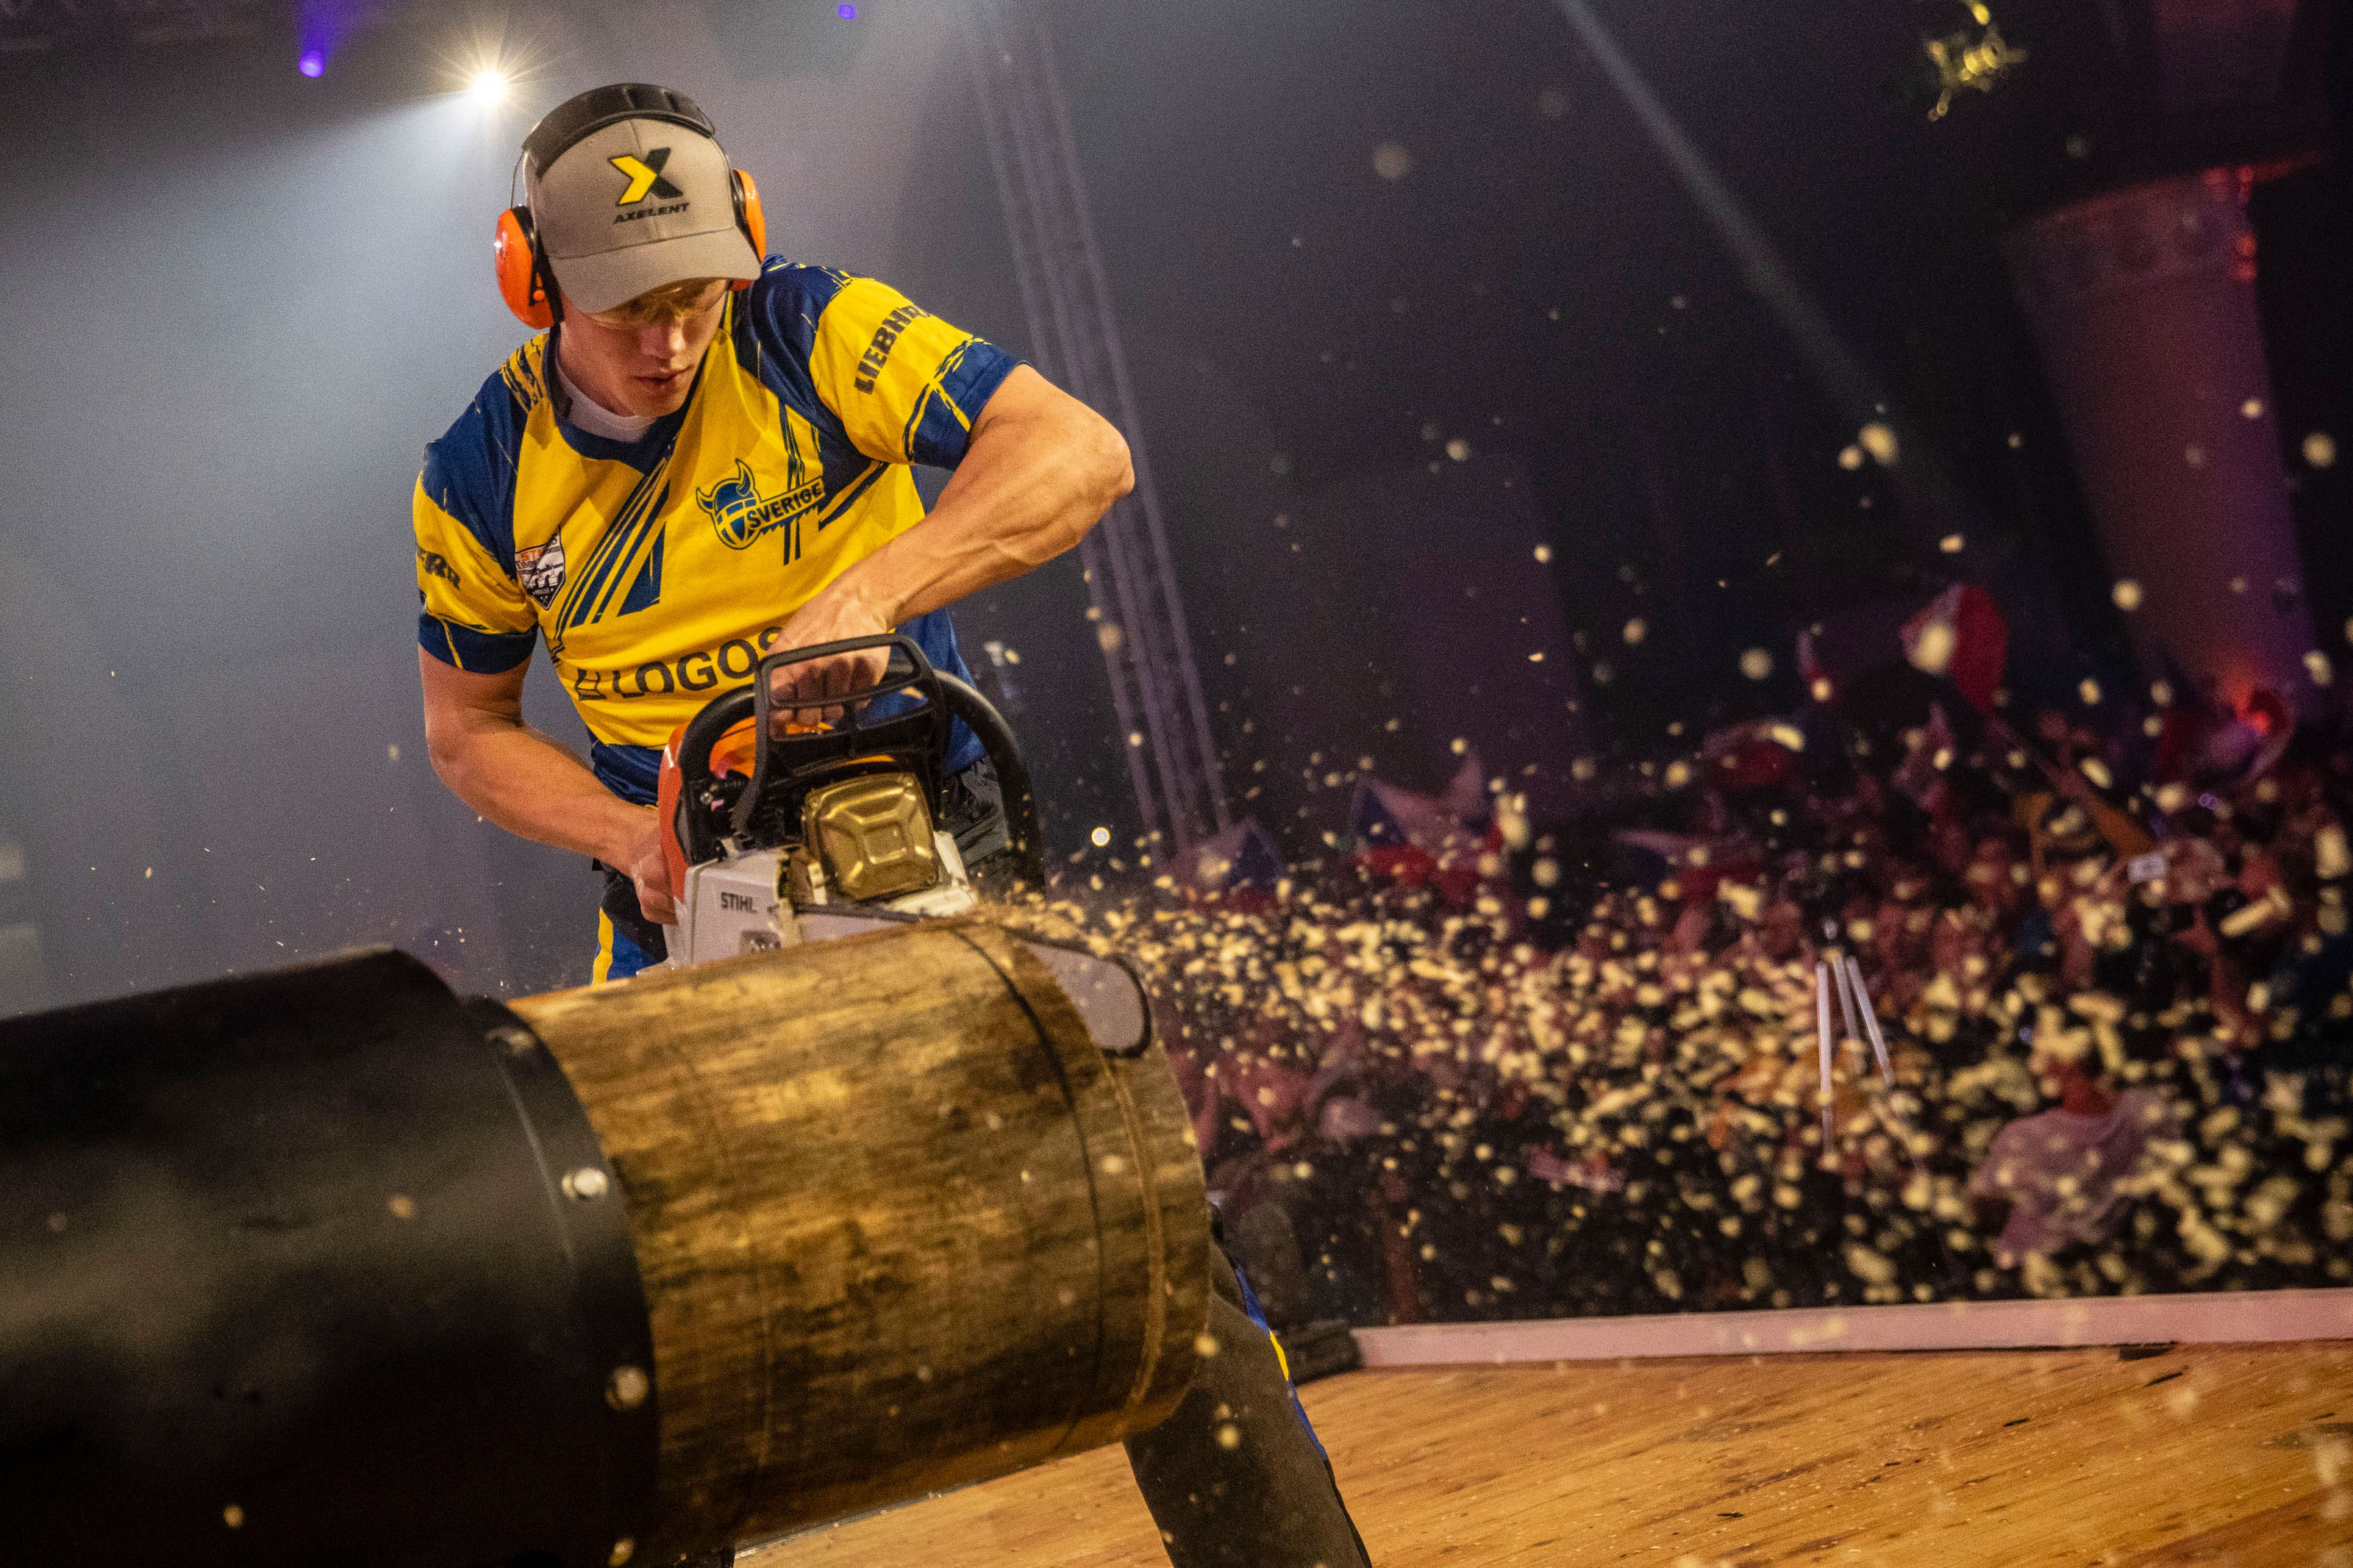 STIHL TIMBERSPORTS® athlete Ferry Svan from Sweden at the 2019 Individual World Championship in Prague during the Stock Saw discipline.